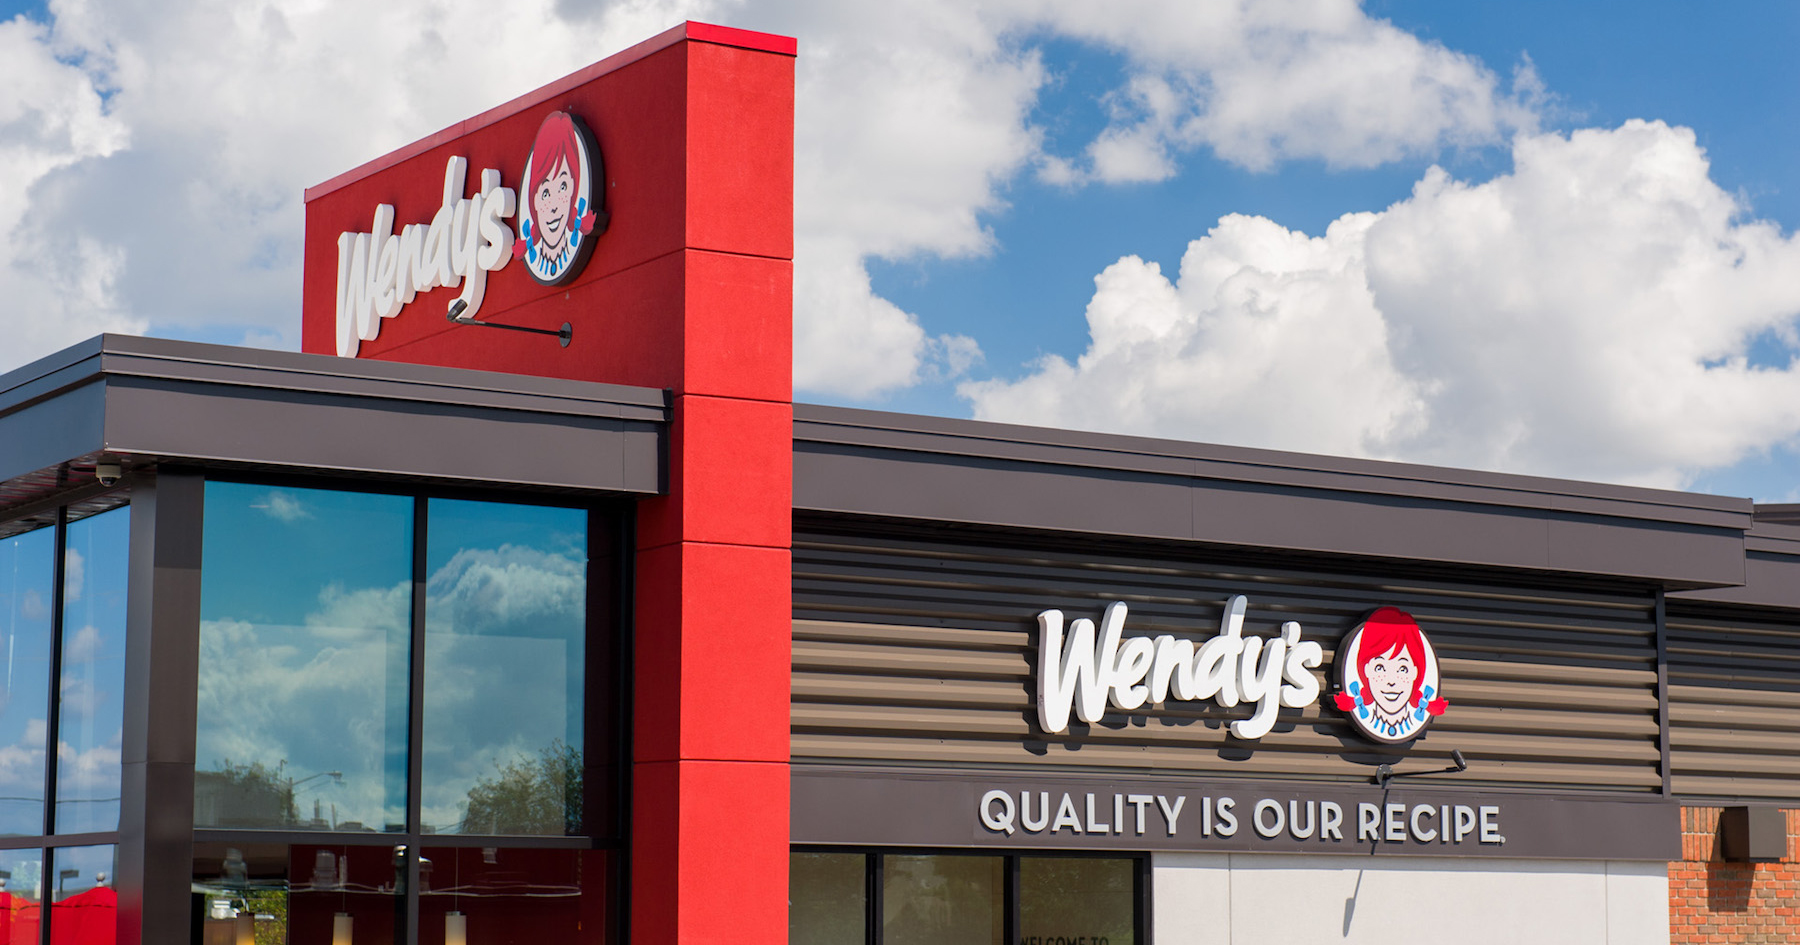 Wendy's history